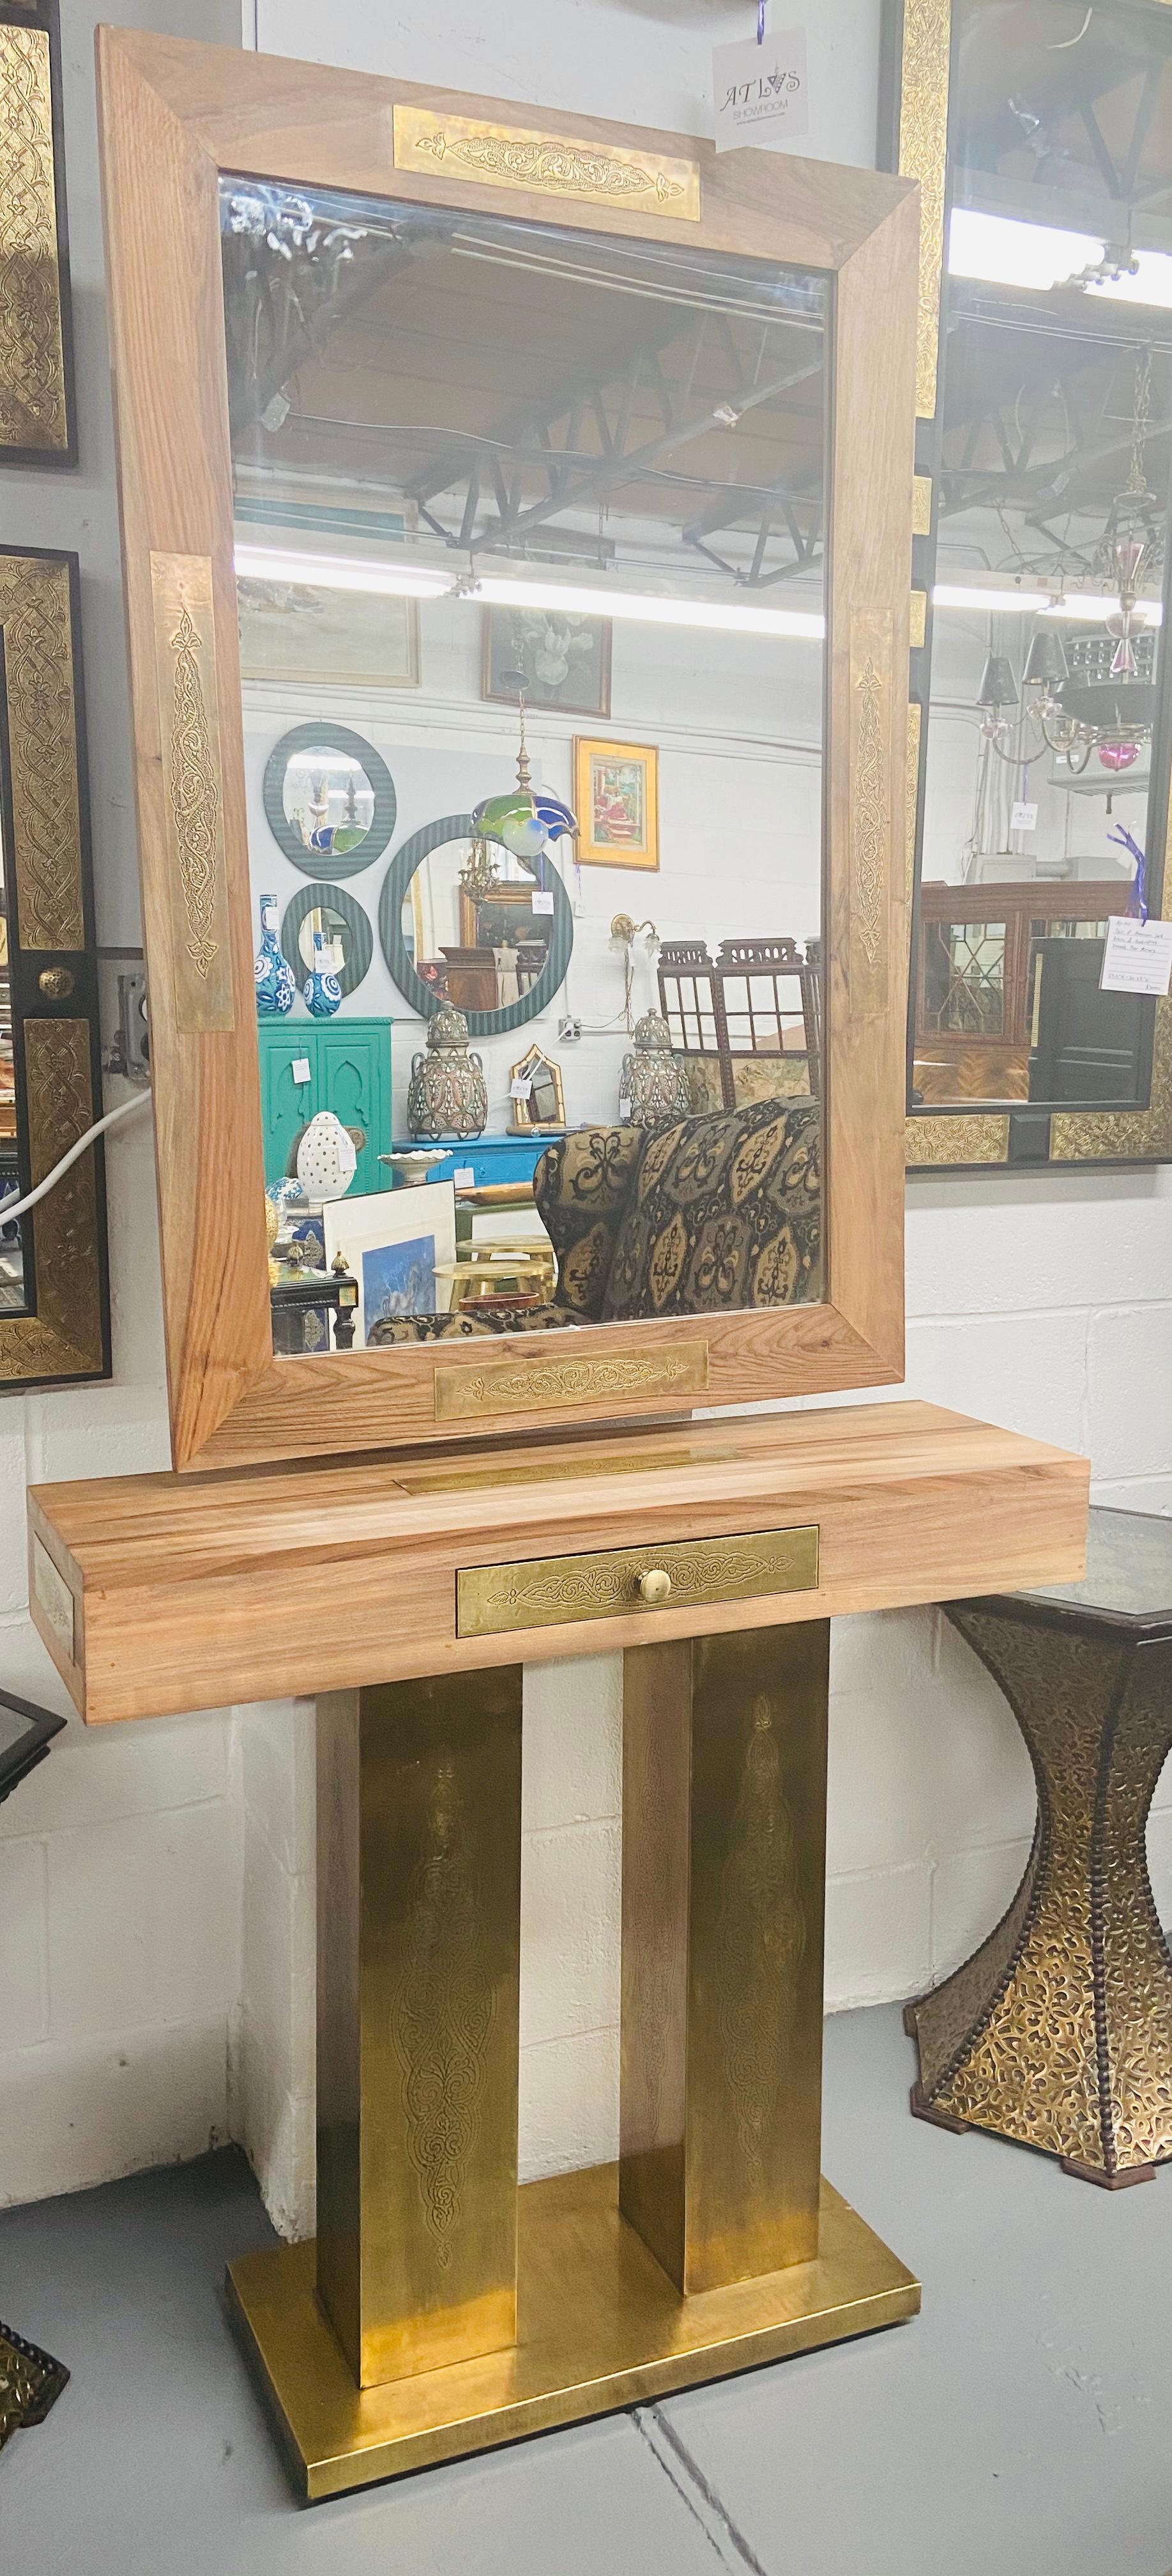 An elegant Hollywood Regency style set of mirror and console. Made of high quality walnut, the mirror and console are decorated with gold brass featuring a fine and elegant filigree design.

This mirror and console will look fabulous in your